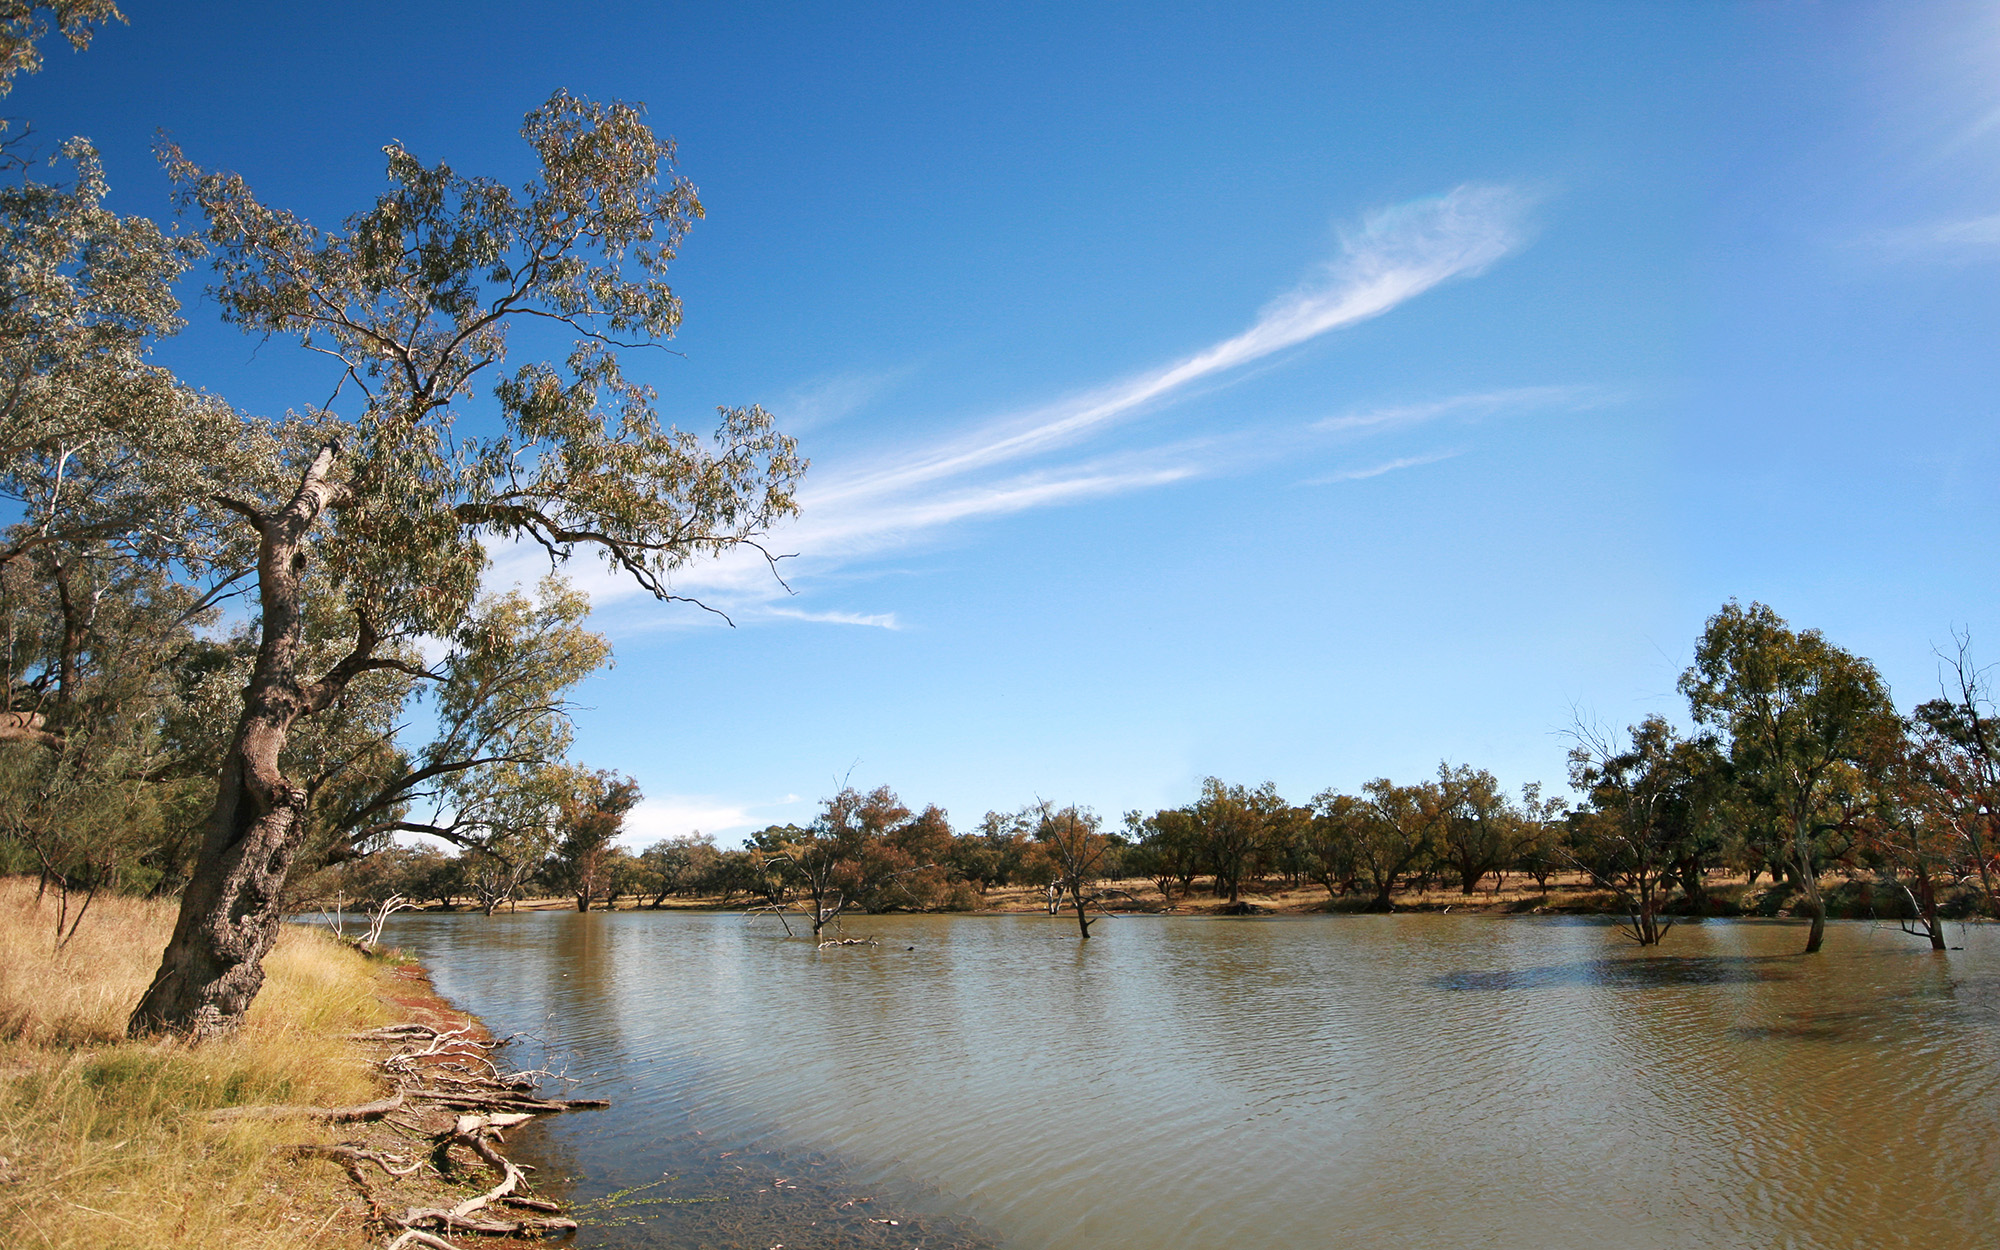 Darling river in outback Australia near the town of Bourke.